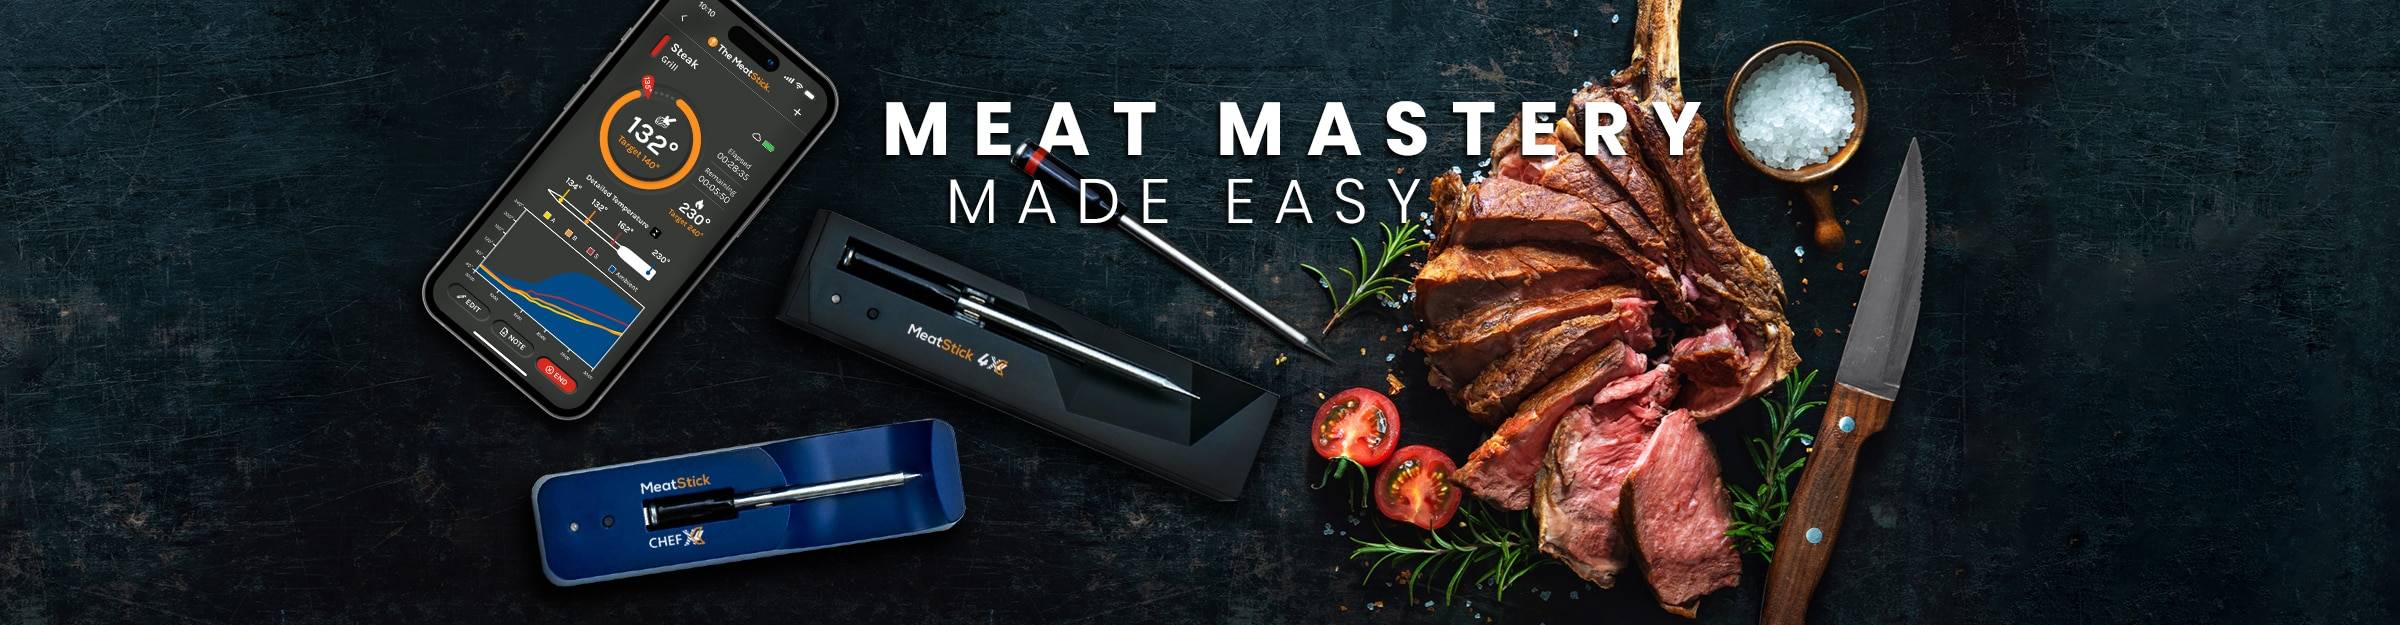 The MeatStick Wireless Meat Thermometer: Meat Mastery Made Easy for Every Cook